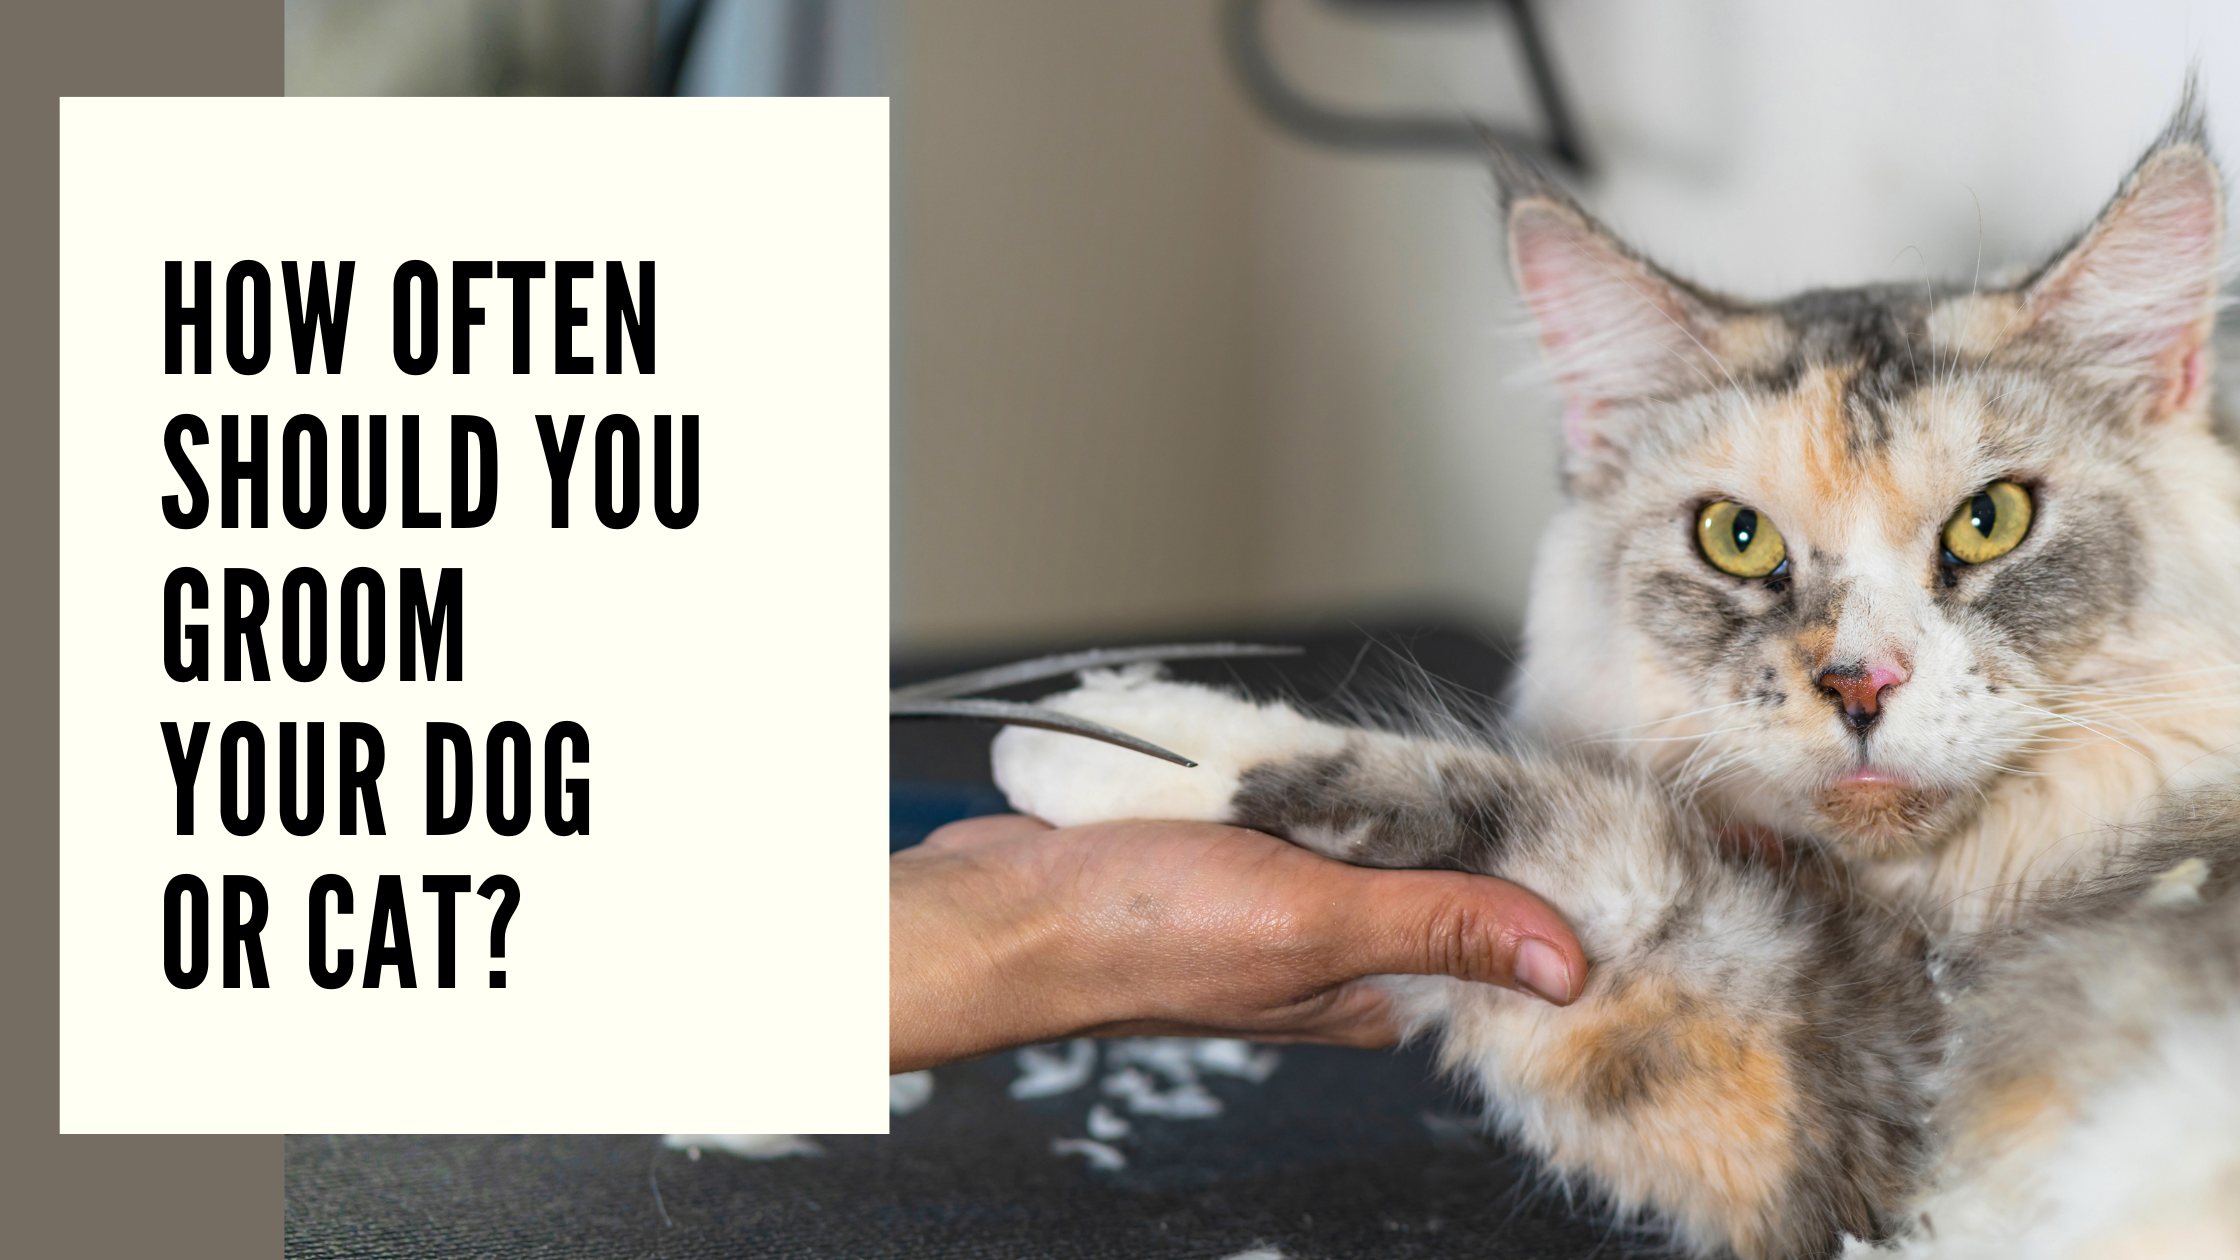 How Often Should You Groom Your Dog or Cat